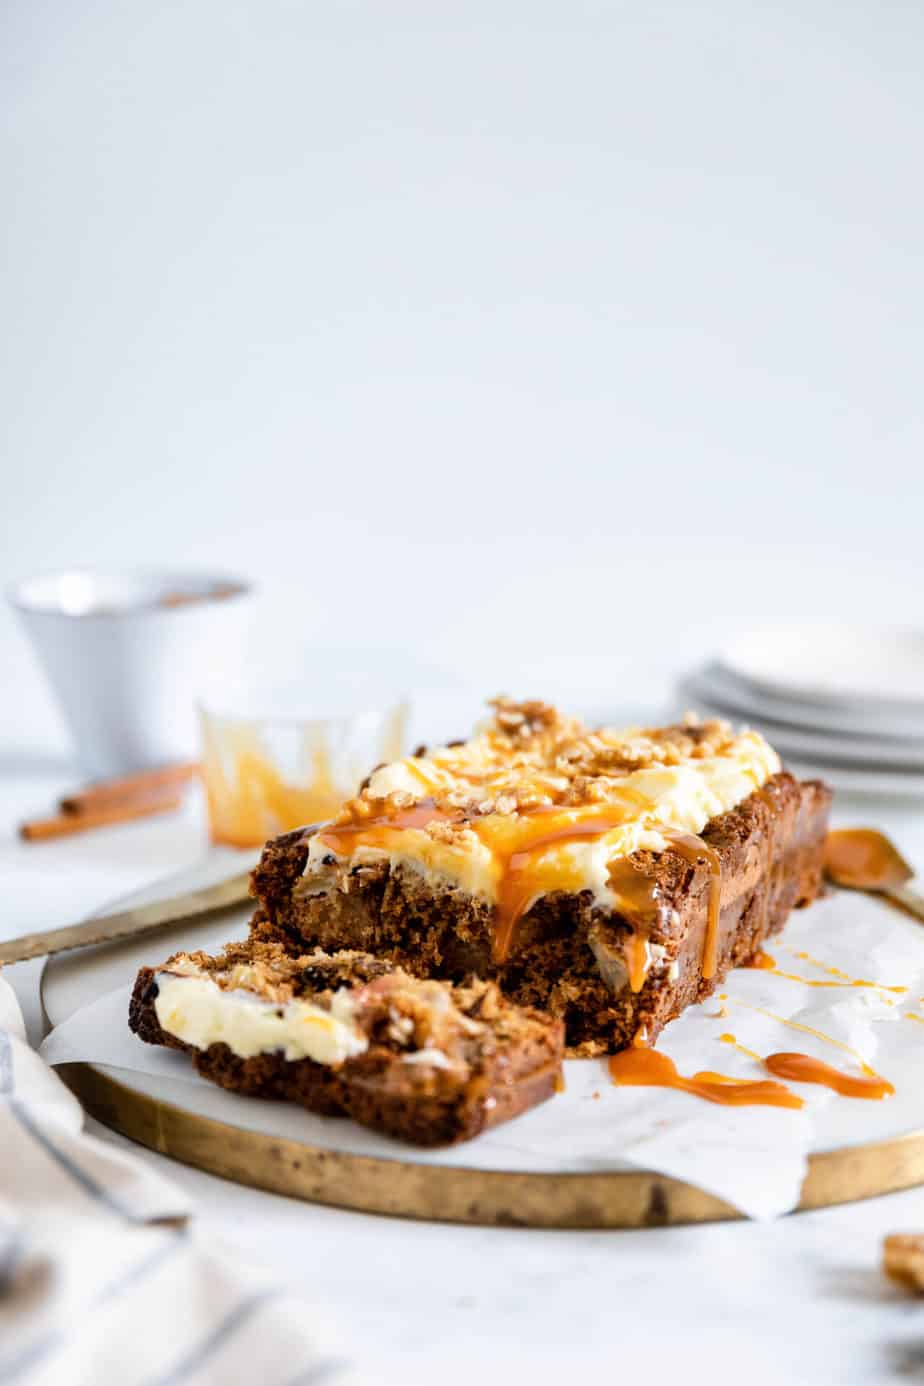 A apple and walnut loaf topped with creamy frosting and a drizzle of caramel sauce.